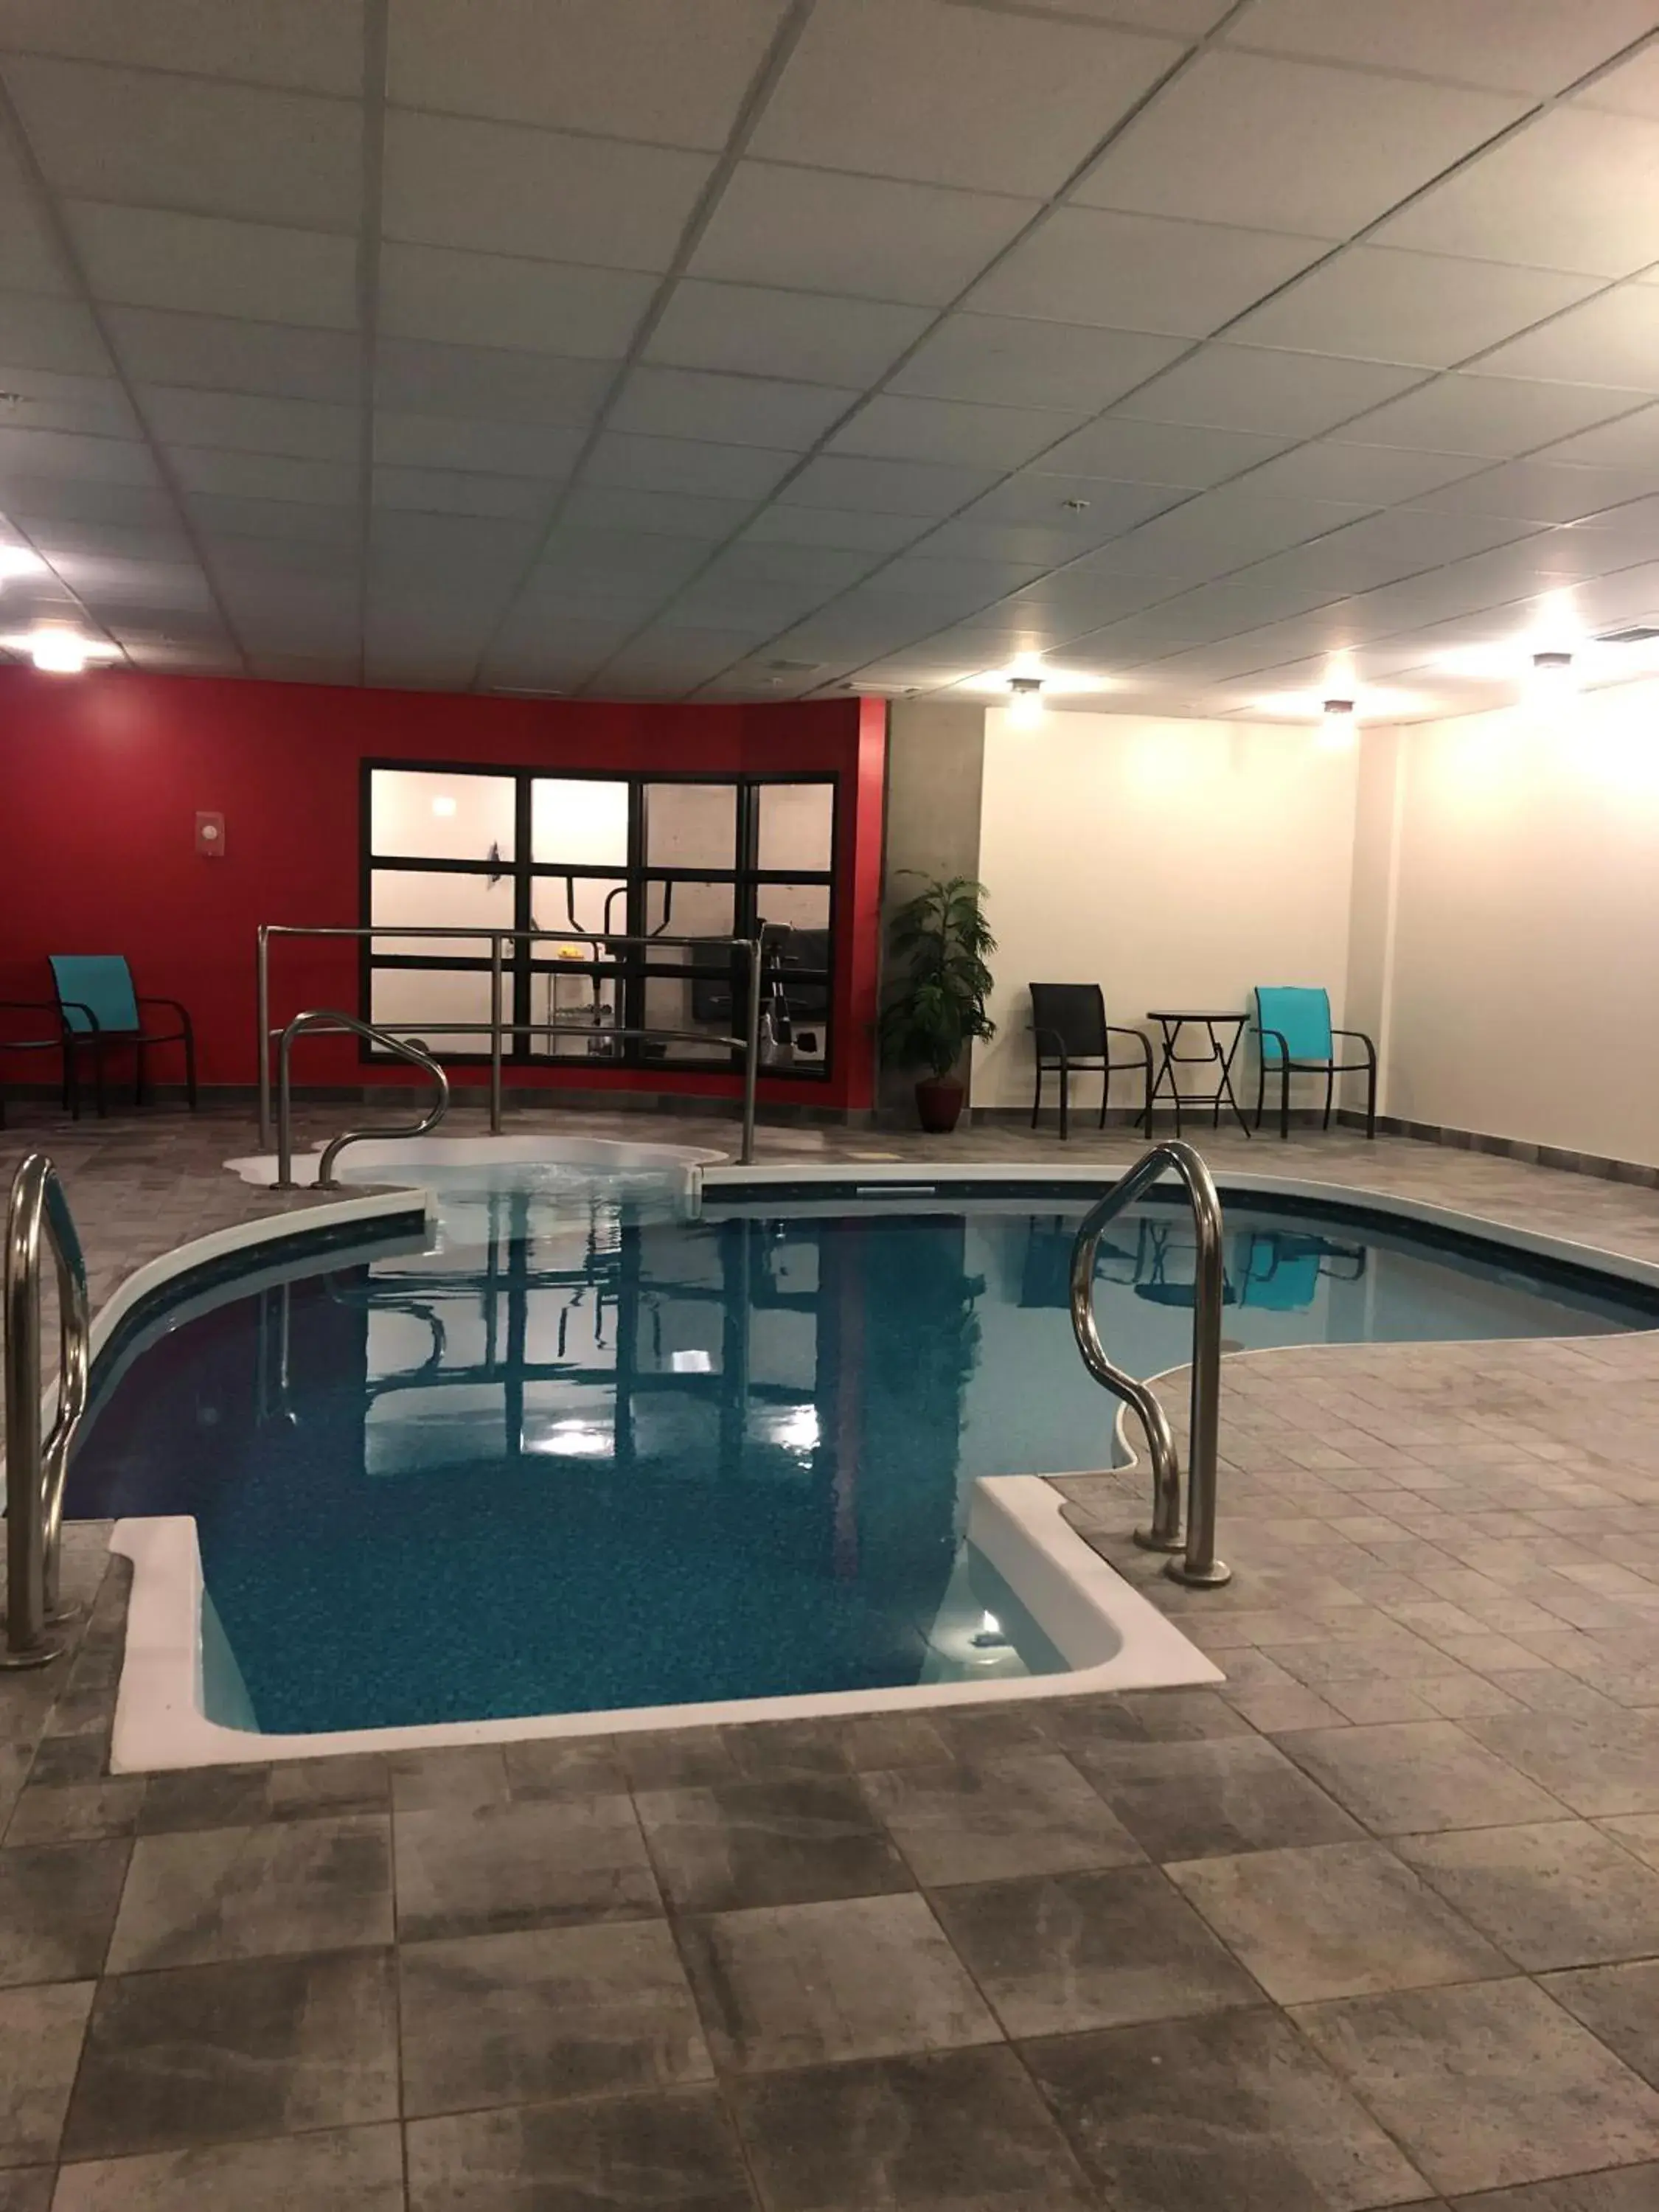 Swimming Pool in Grand Times Hotel - Aeroport de Quebec